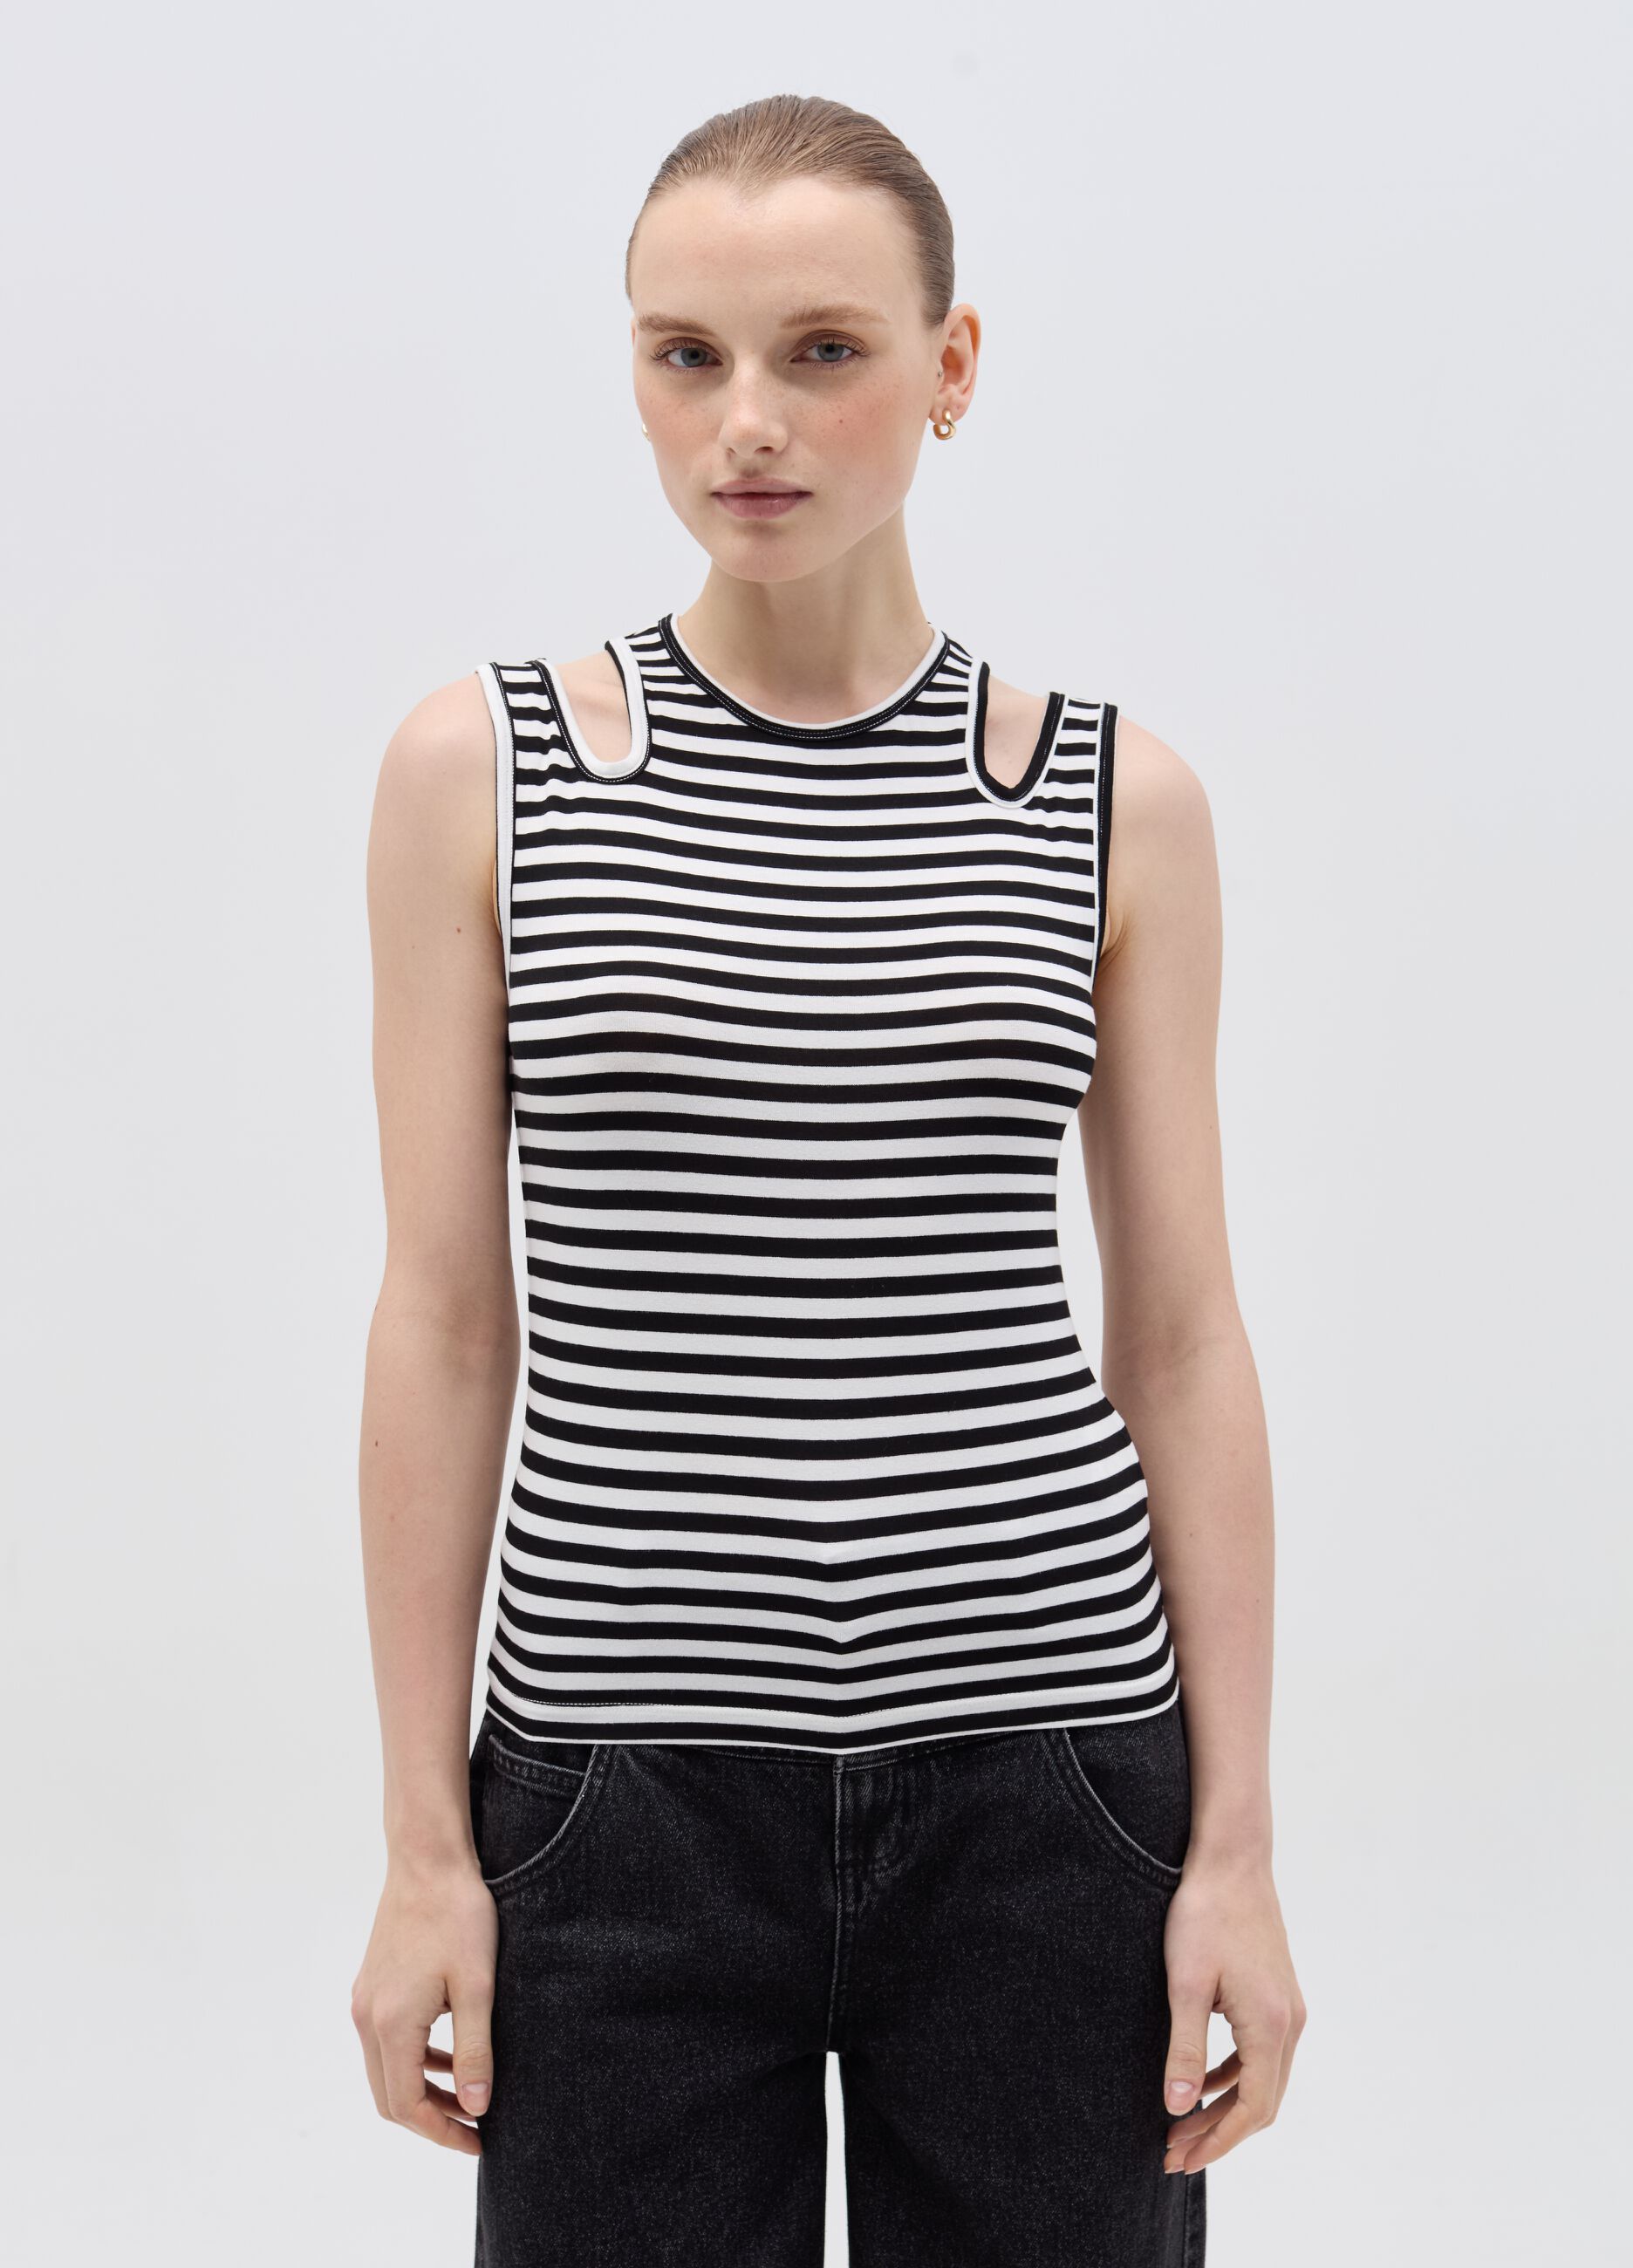 Striped tank top with cut-out details